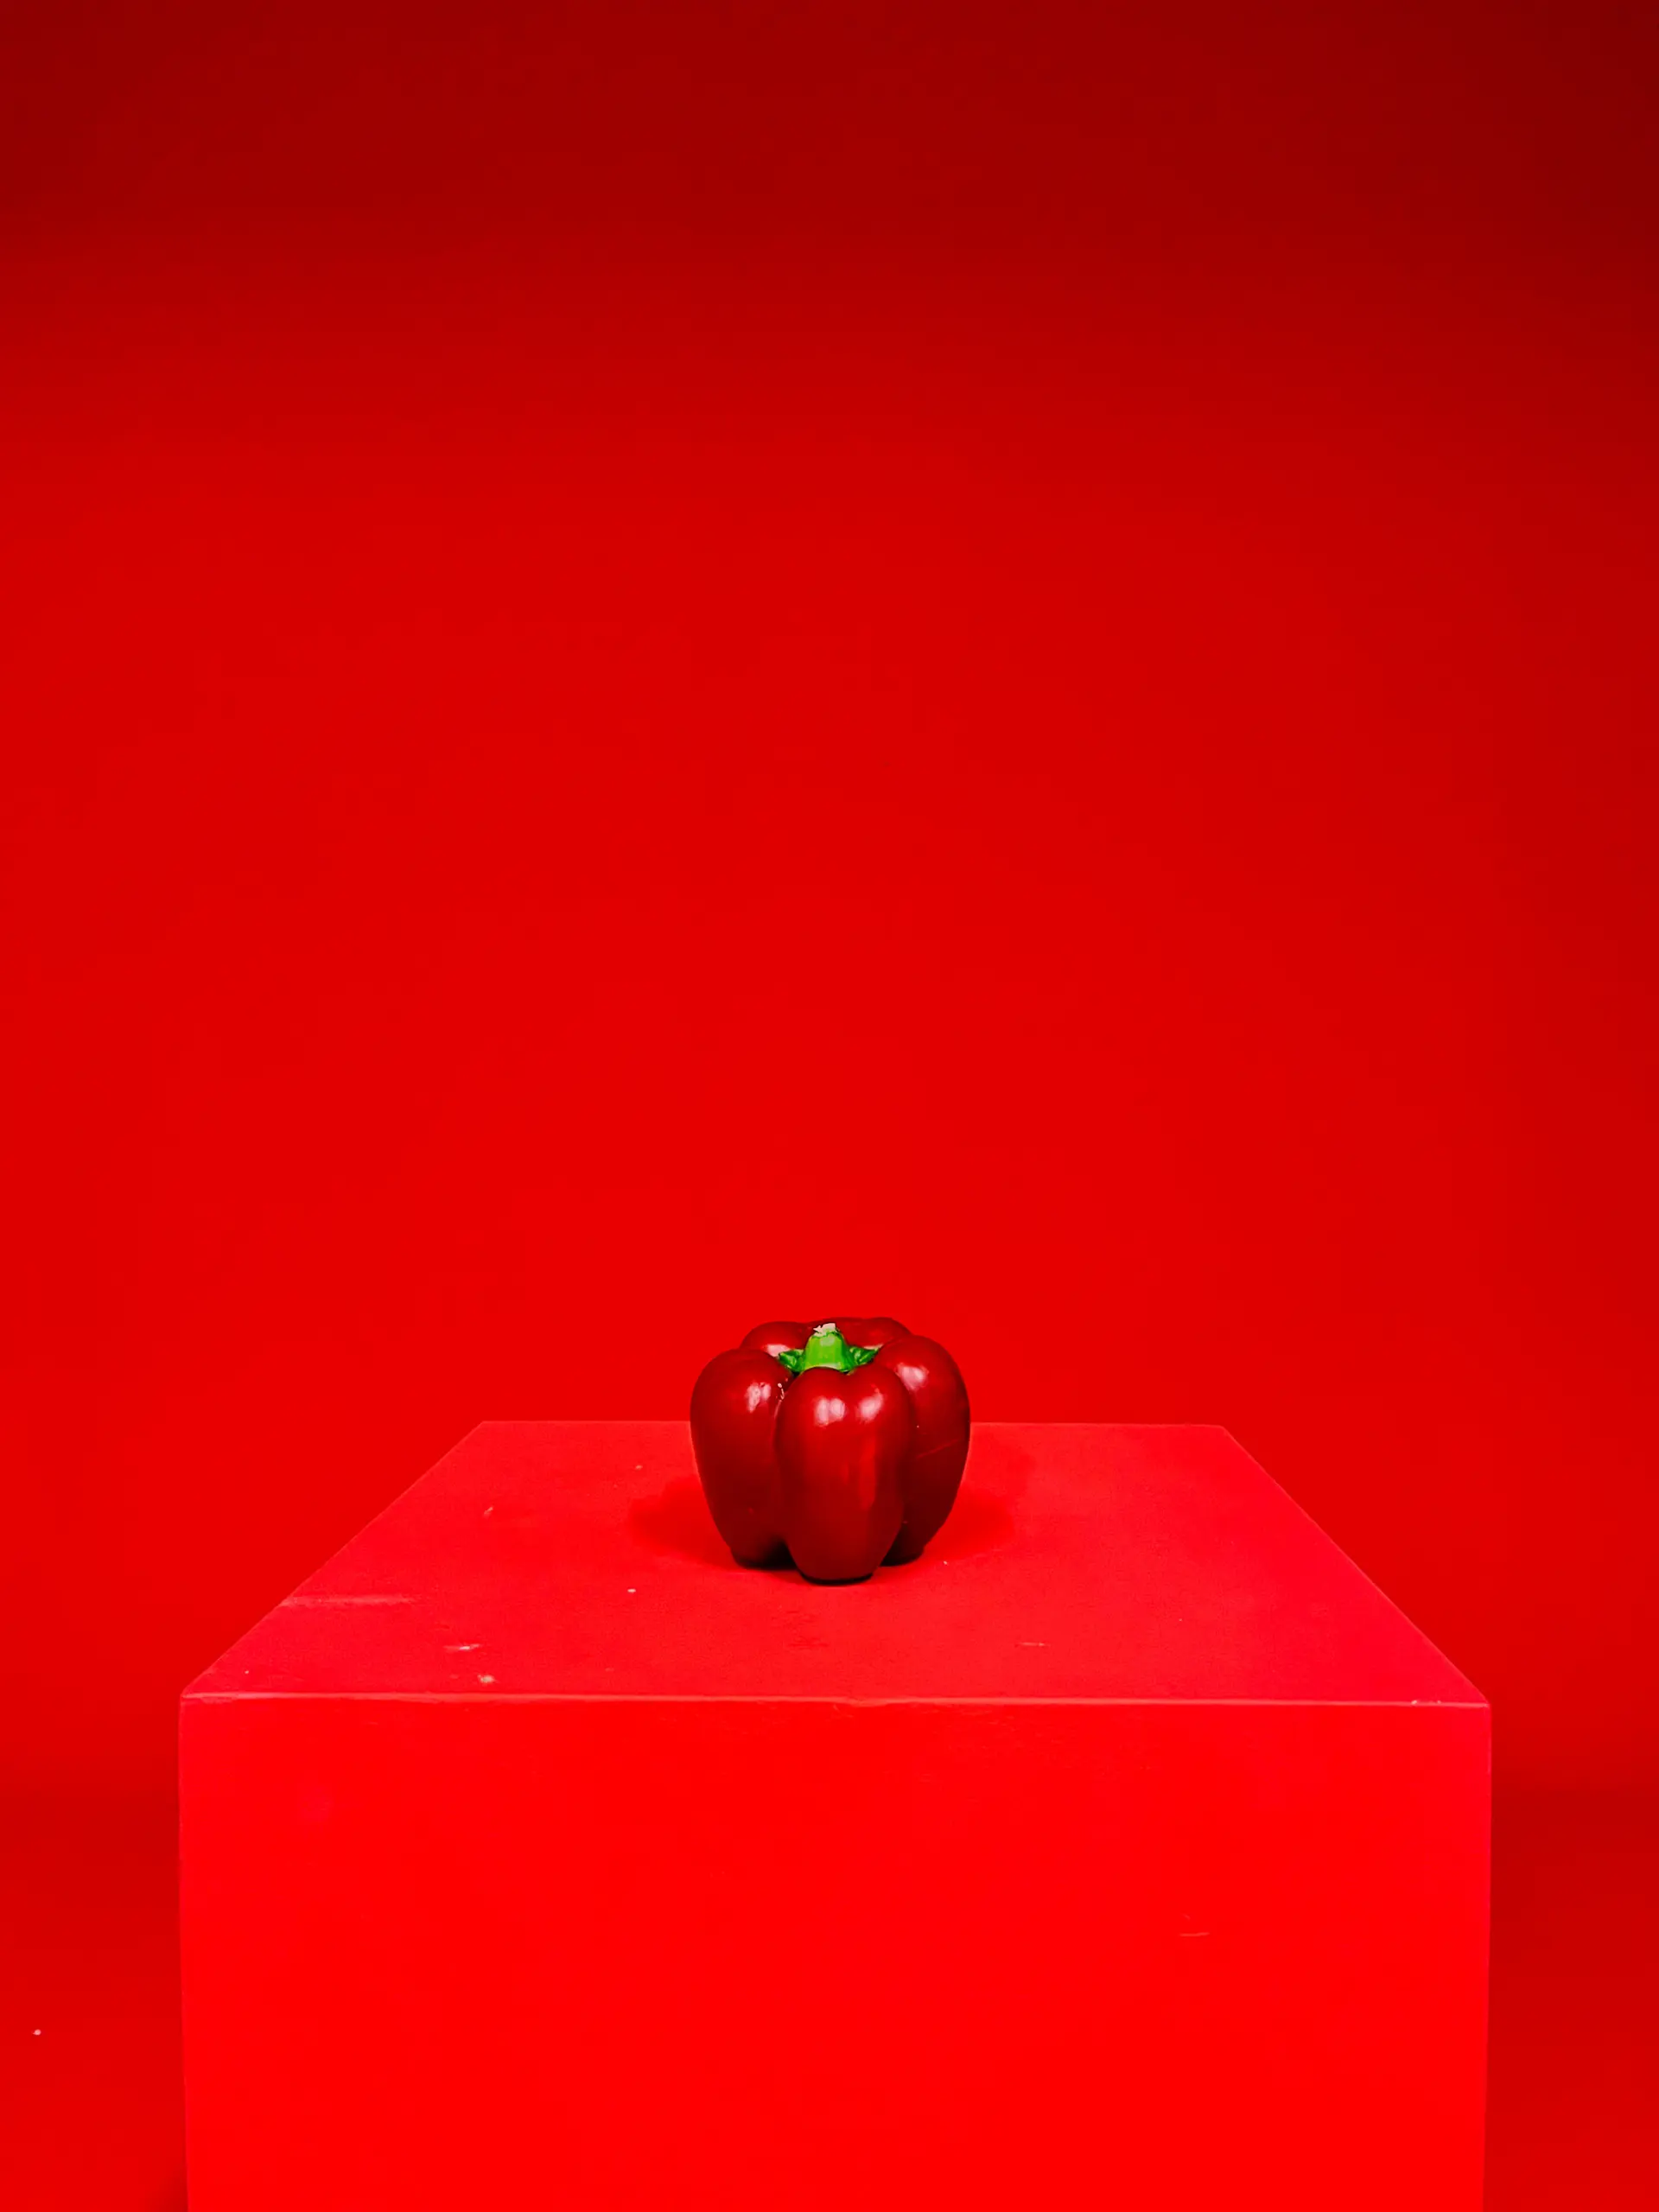 food photography of red pepper on red block with red backdrop, monochrome